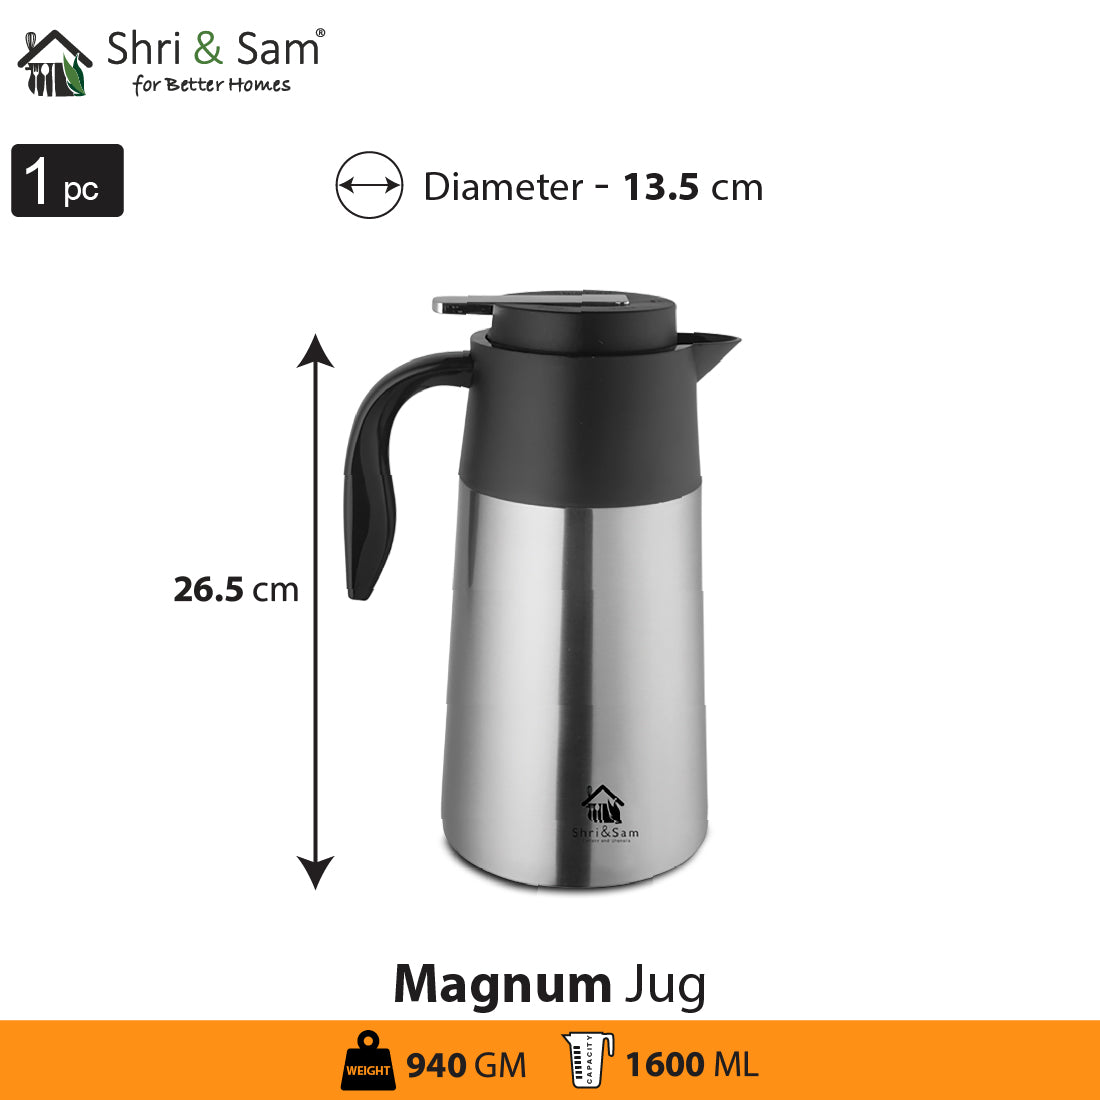 Stainless Steel Double Wall Vacuum Jug Magnum